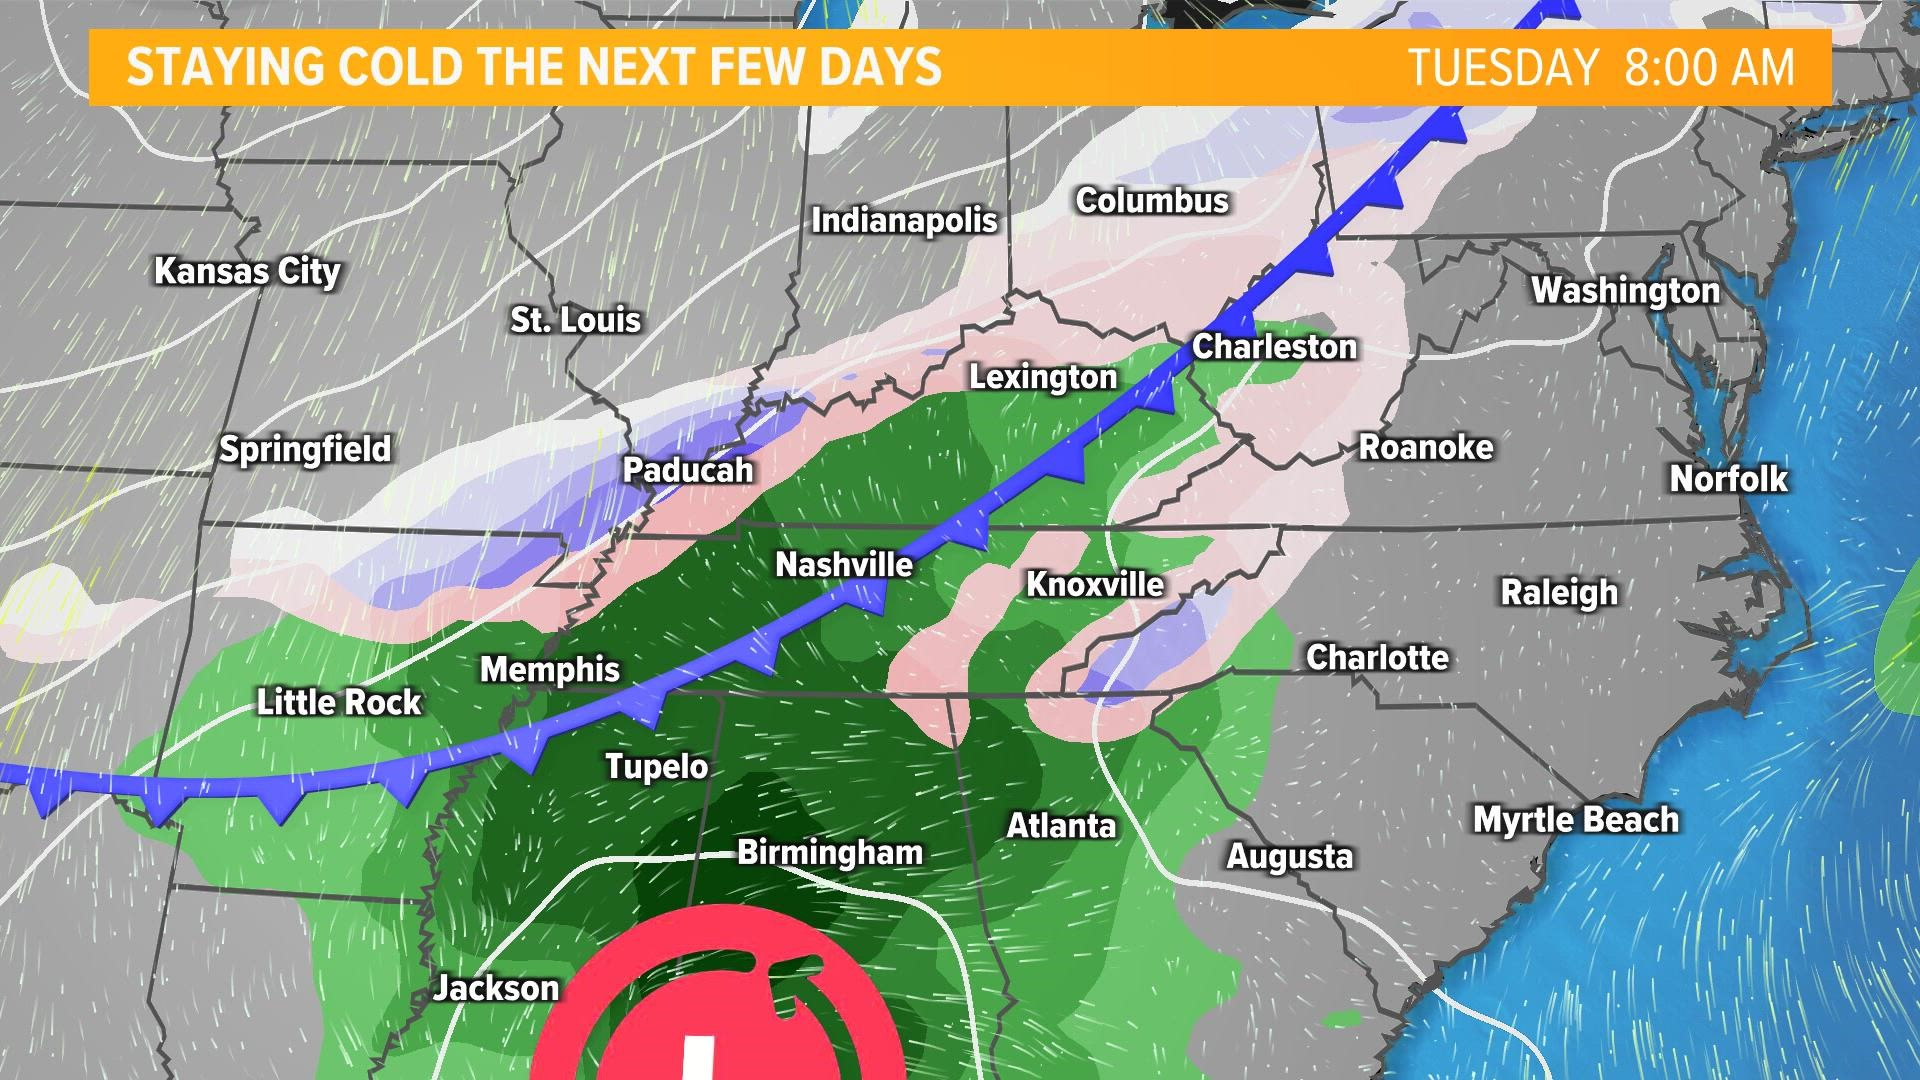 More rain and snow possible Tuesday